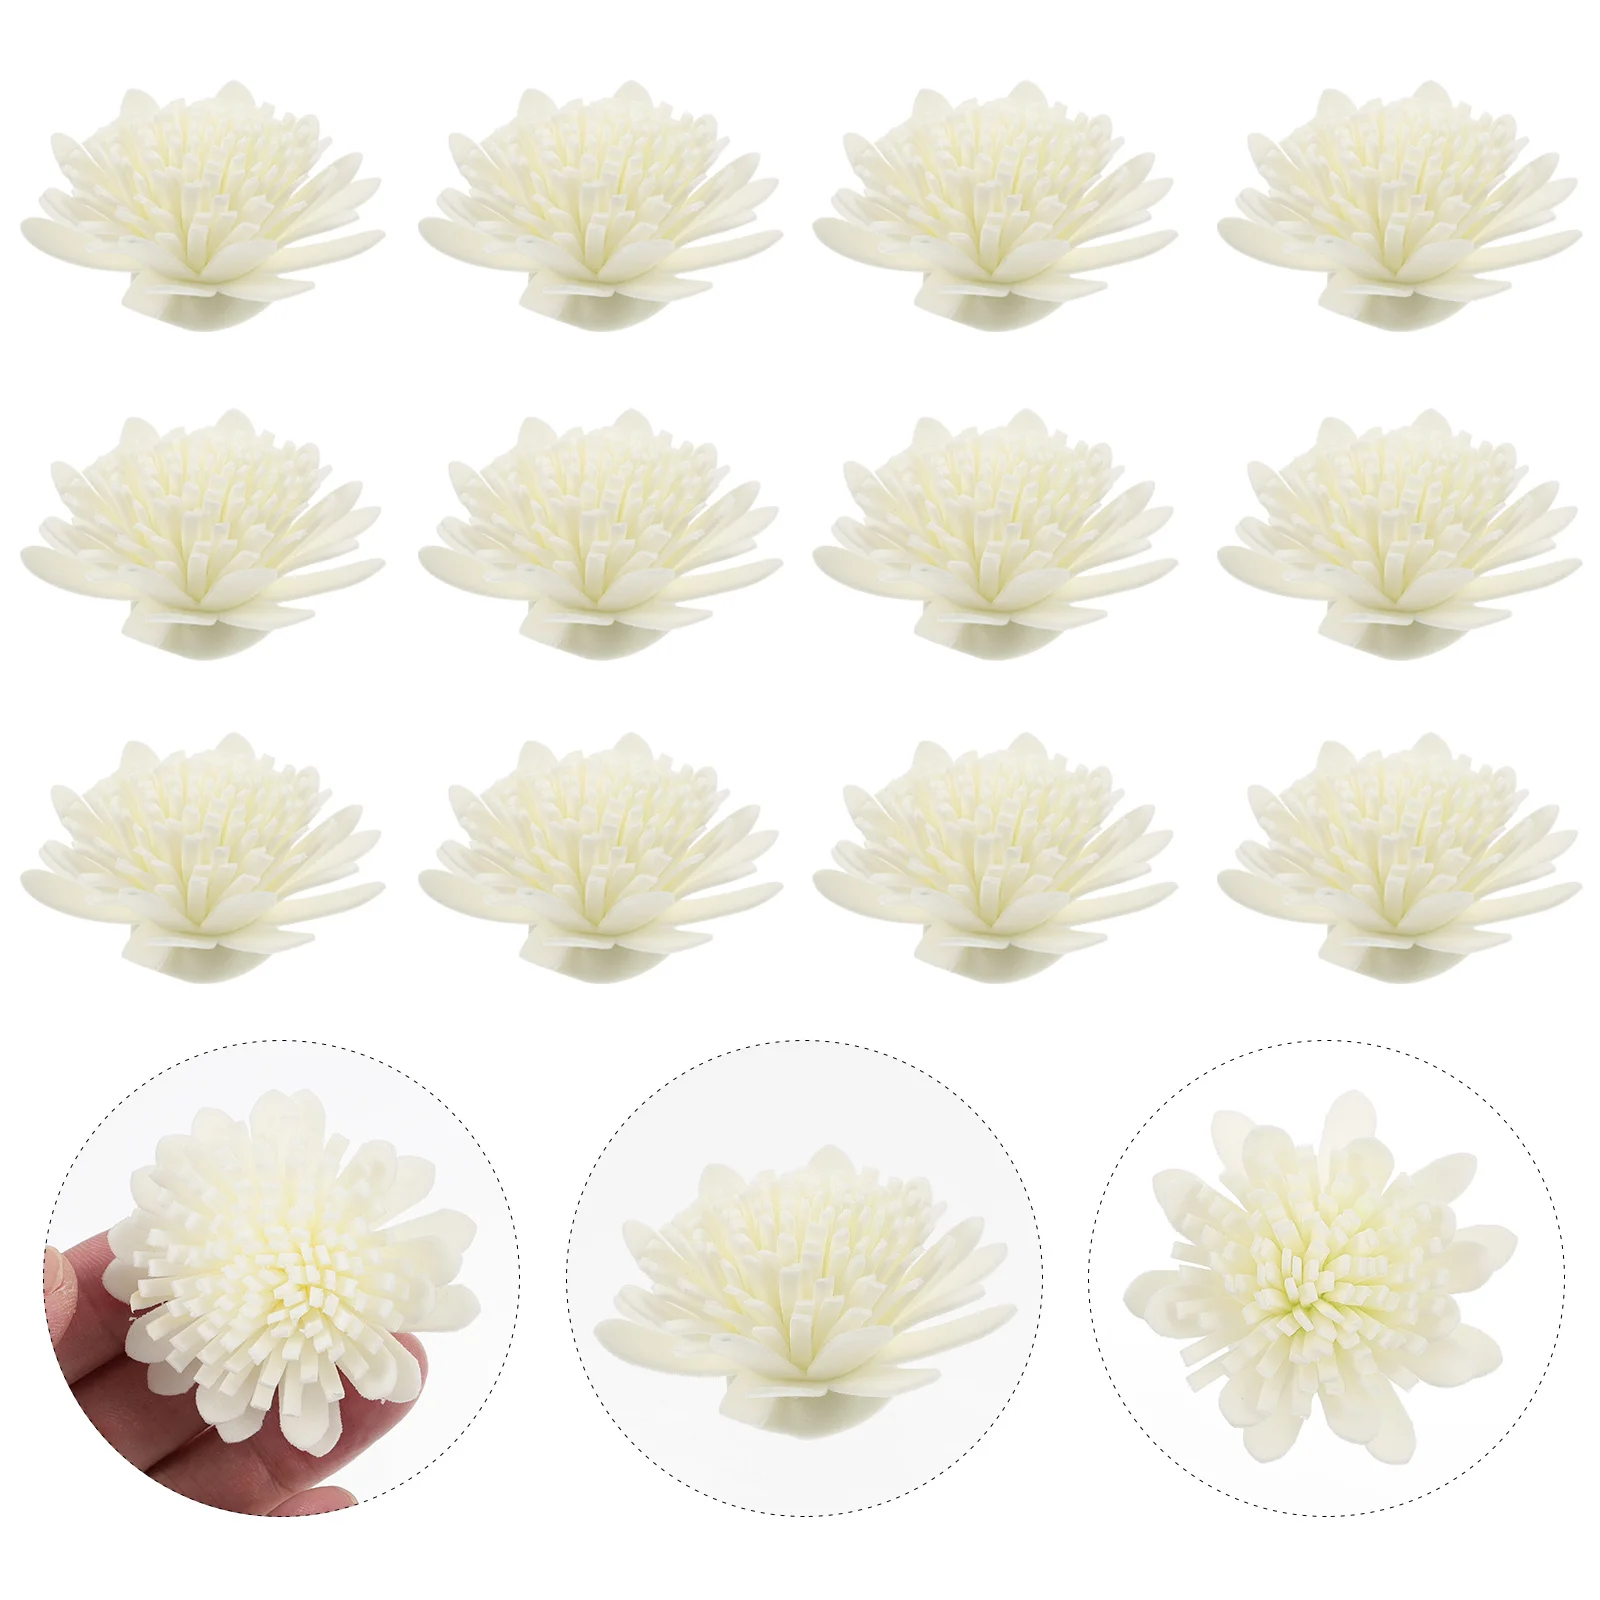 

Diffuser Flower Reed Oil Essential Dried Aroma Chrysanthemum Floral Sticks Flowers Diffusers Oils Aromatherapy Accessories